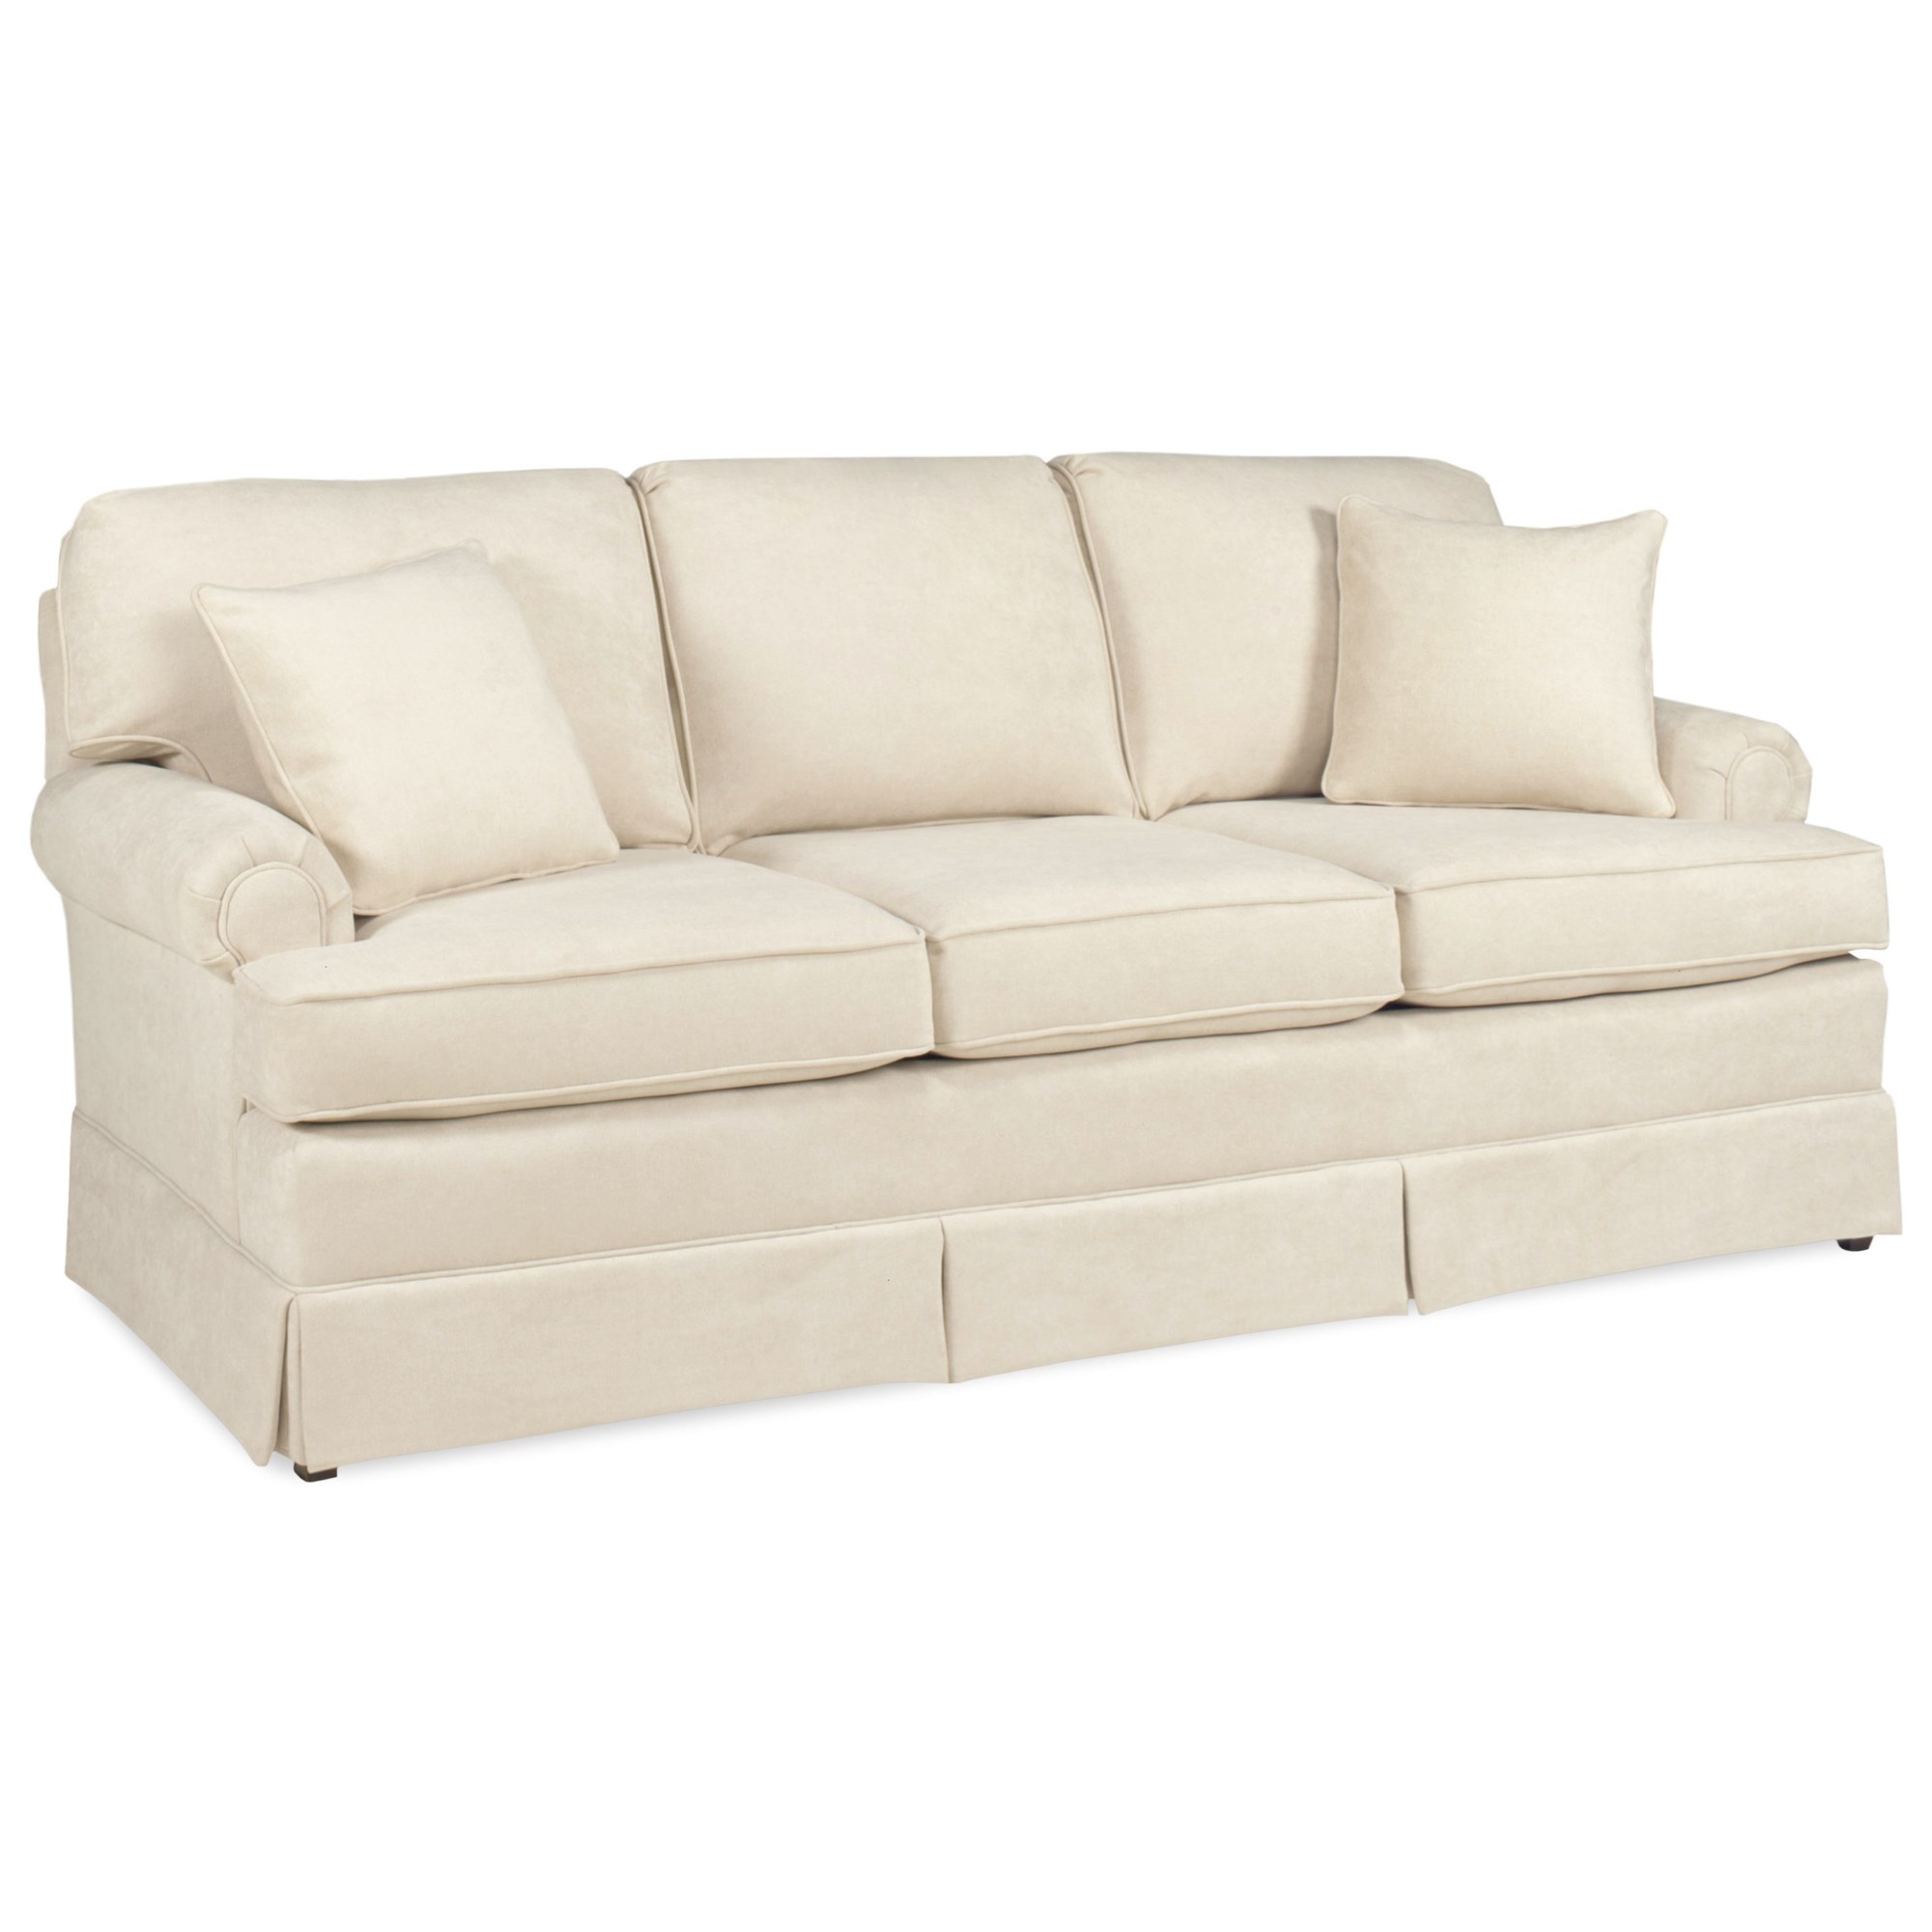 It is time for Mueller Furniture's Spring Clearance and Warehouse Sale!